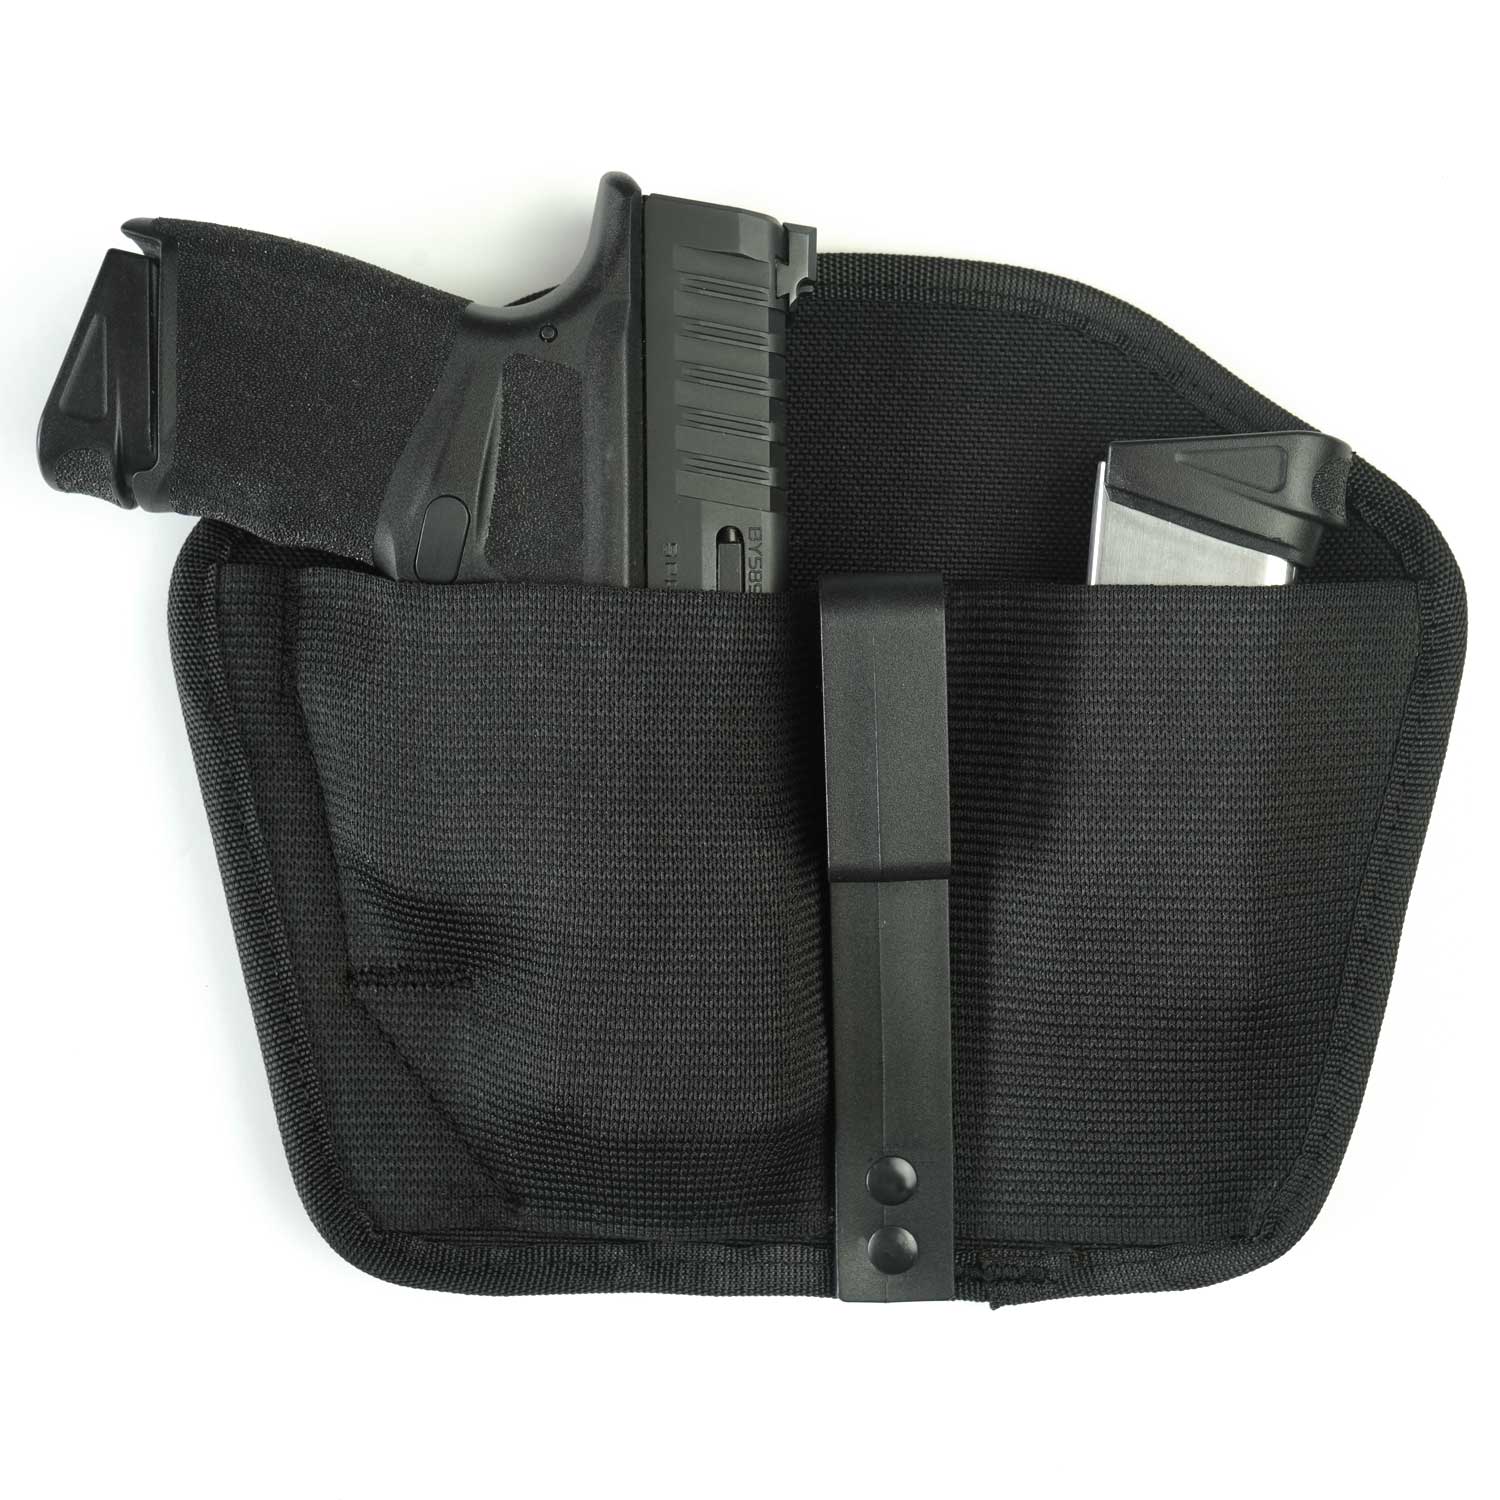  9mm Holsters Pistols for Men/Women, Universal Waistband  Concealed Gun Holster with Mag Pouch for Pistols Right/Left Hand, Inside  and Outside The Waistband Bundle, Compact Subcompact Handguns